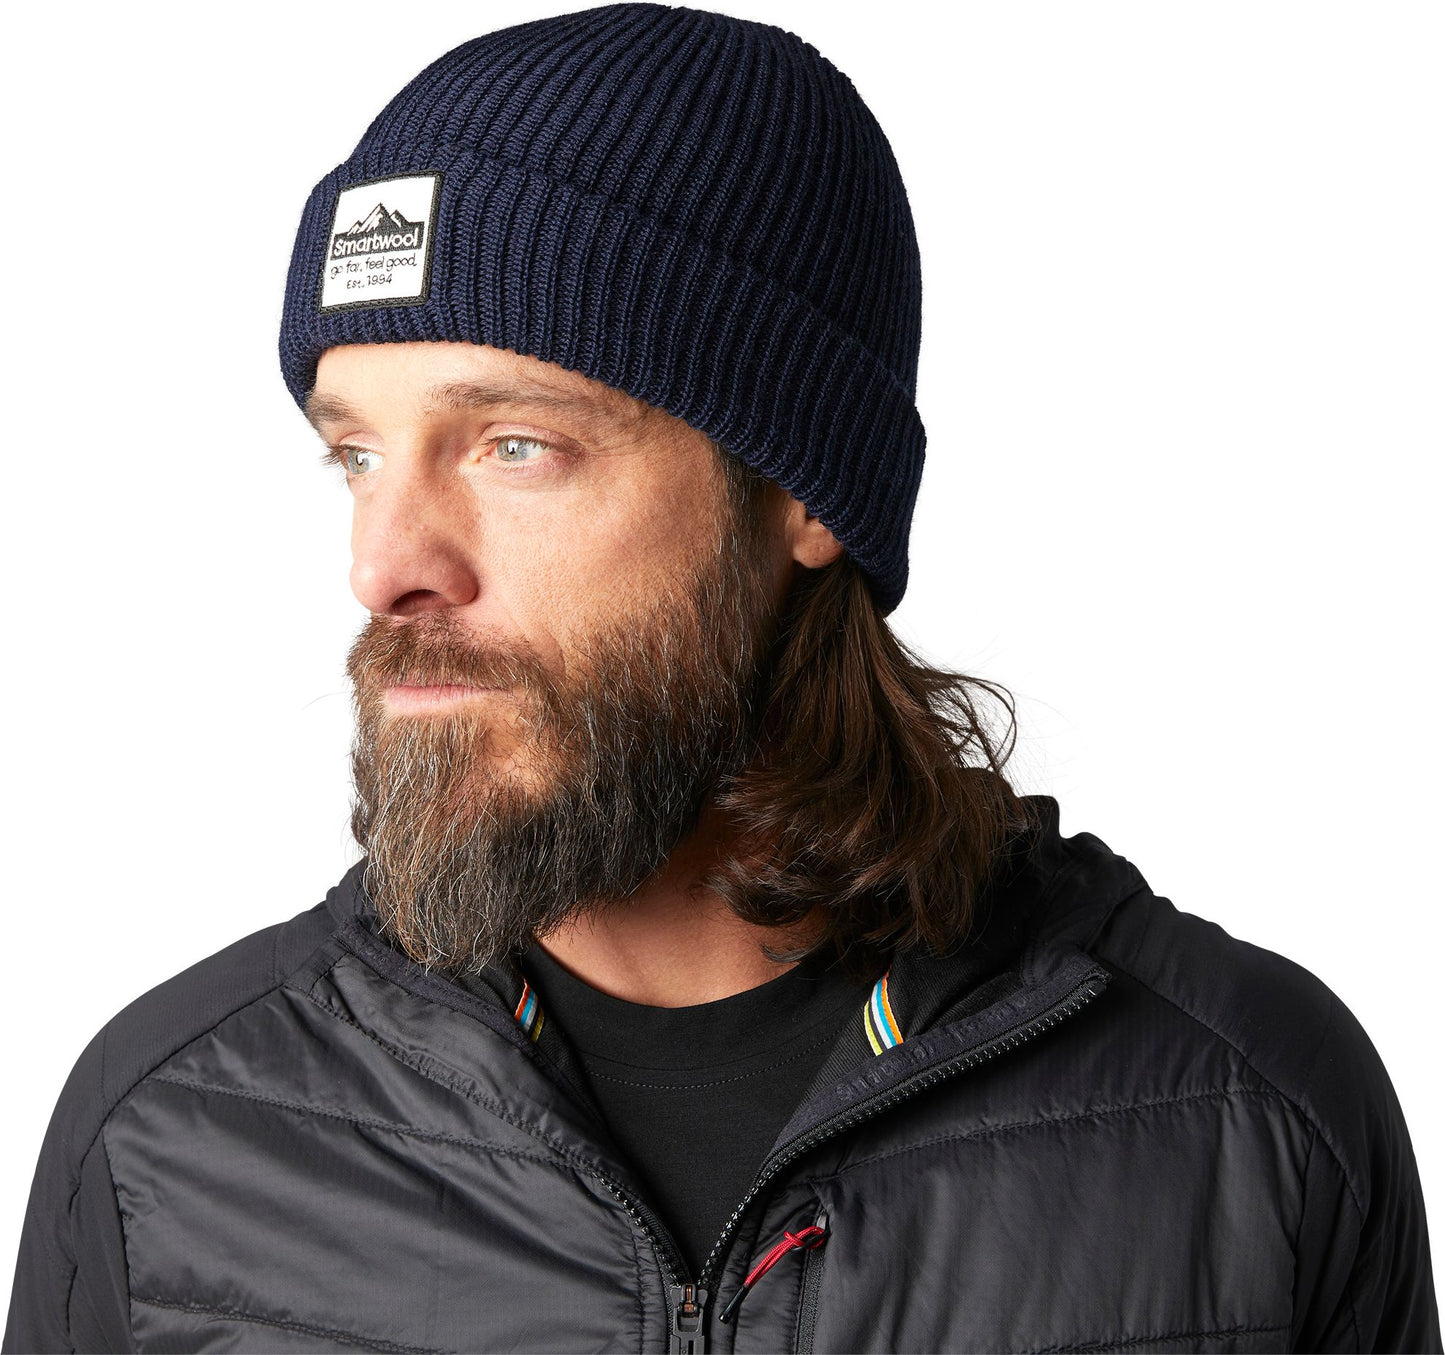 Smartwool Accessories Smartwool Patch Beanie Deep Na